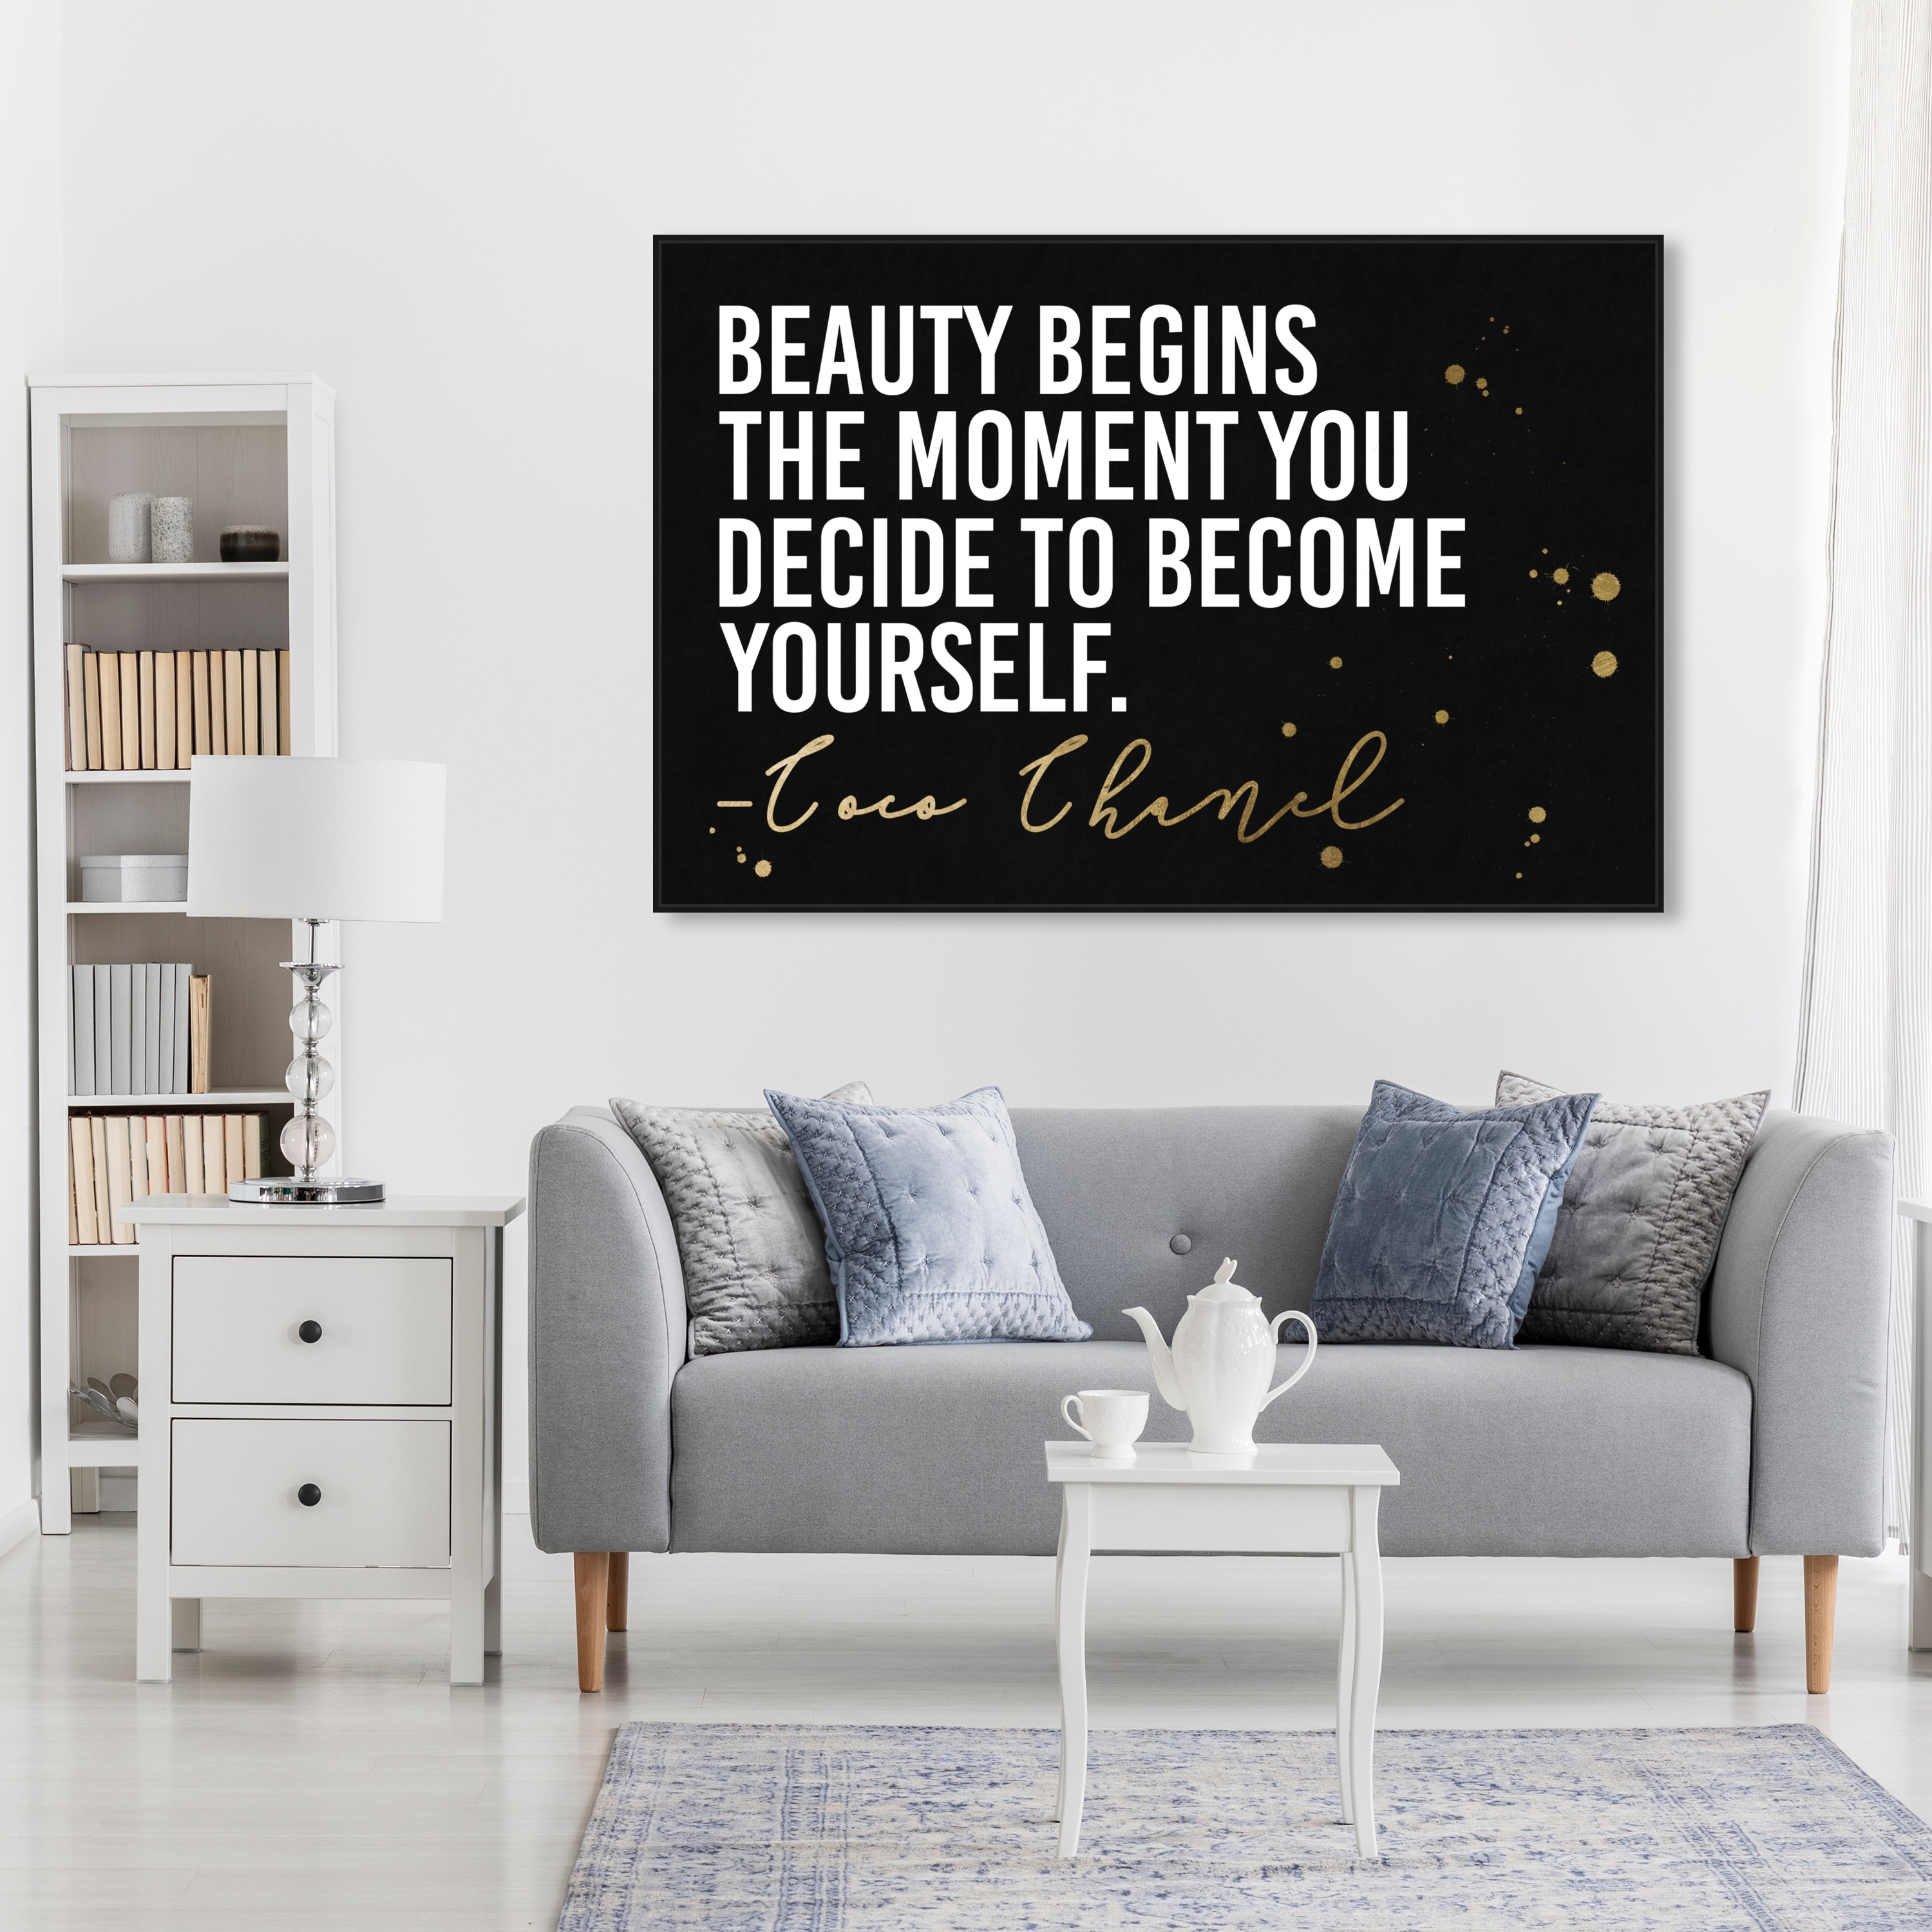 Beauty begins the moment you decide to be yourself -Coco Chanel